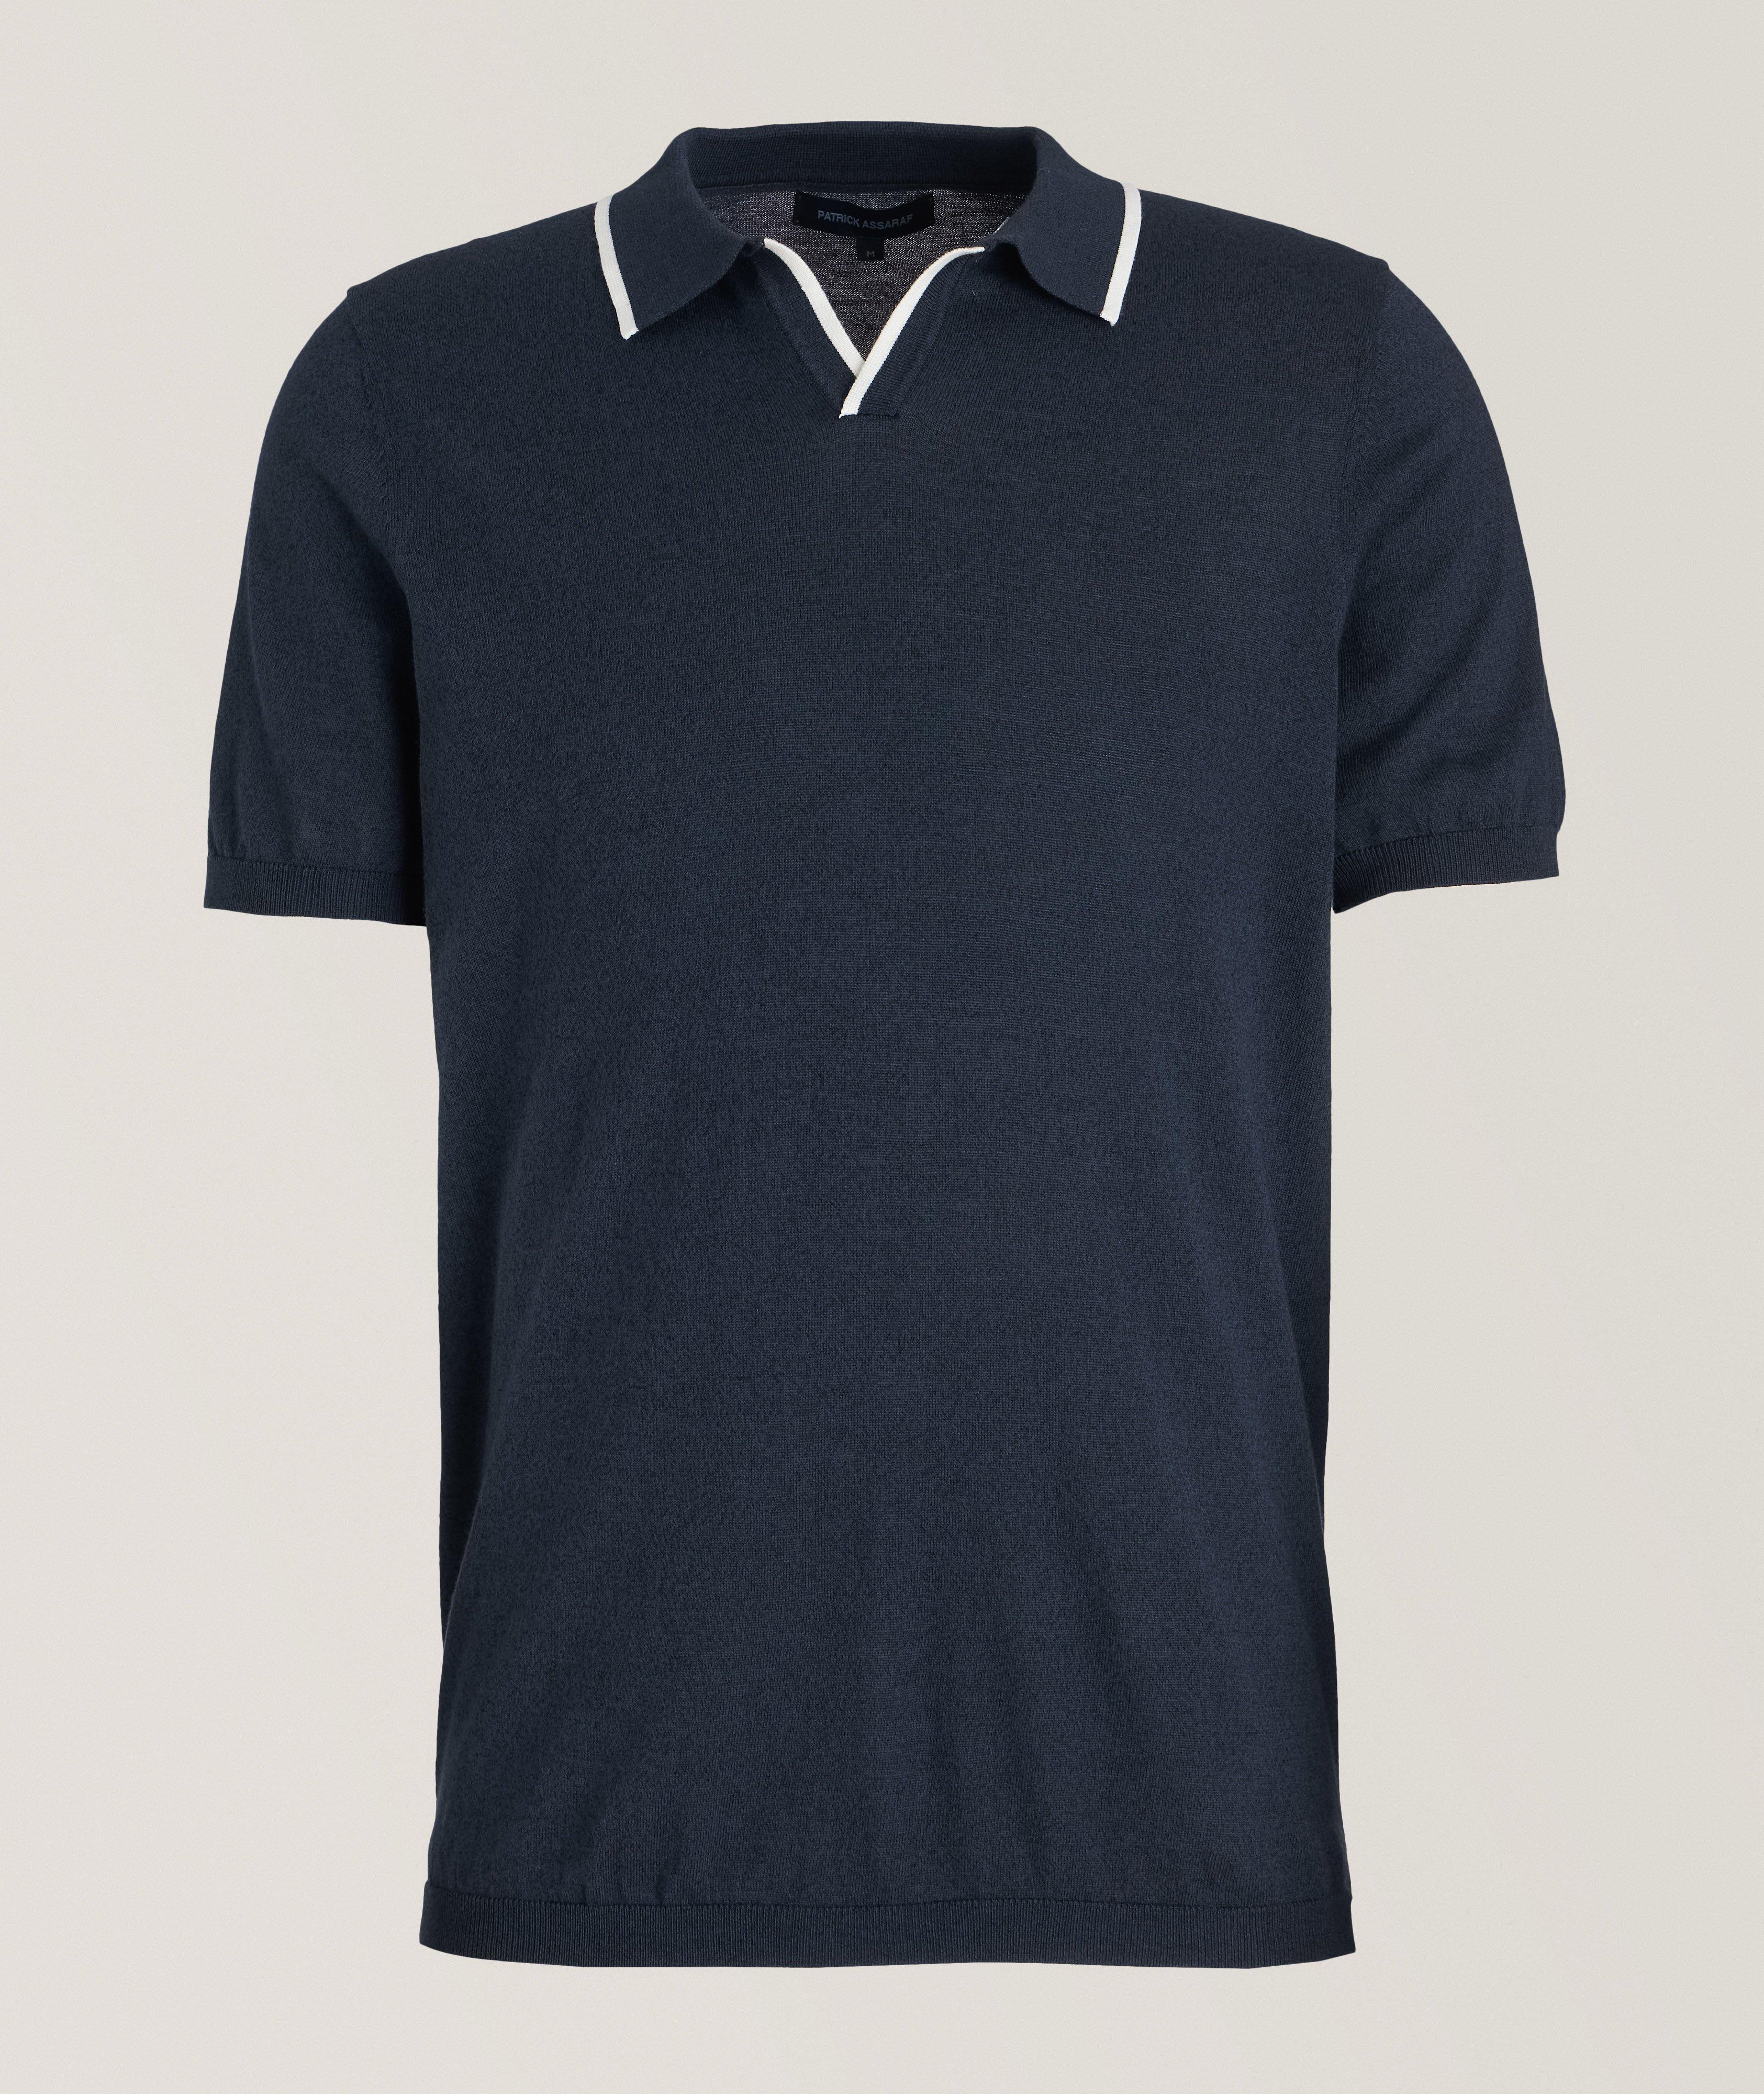 Contrast Piped Cotton-Blend Knit Polo